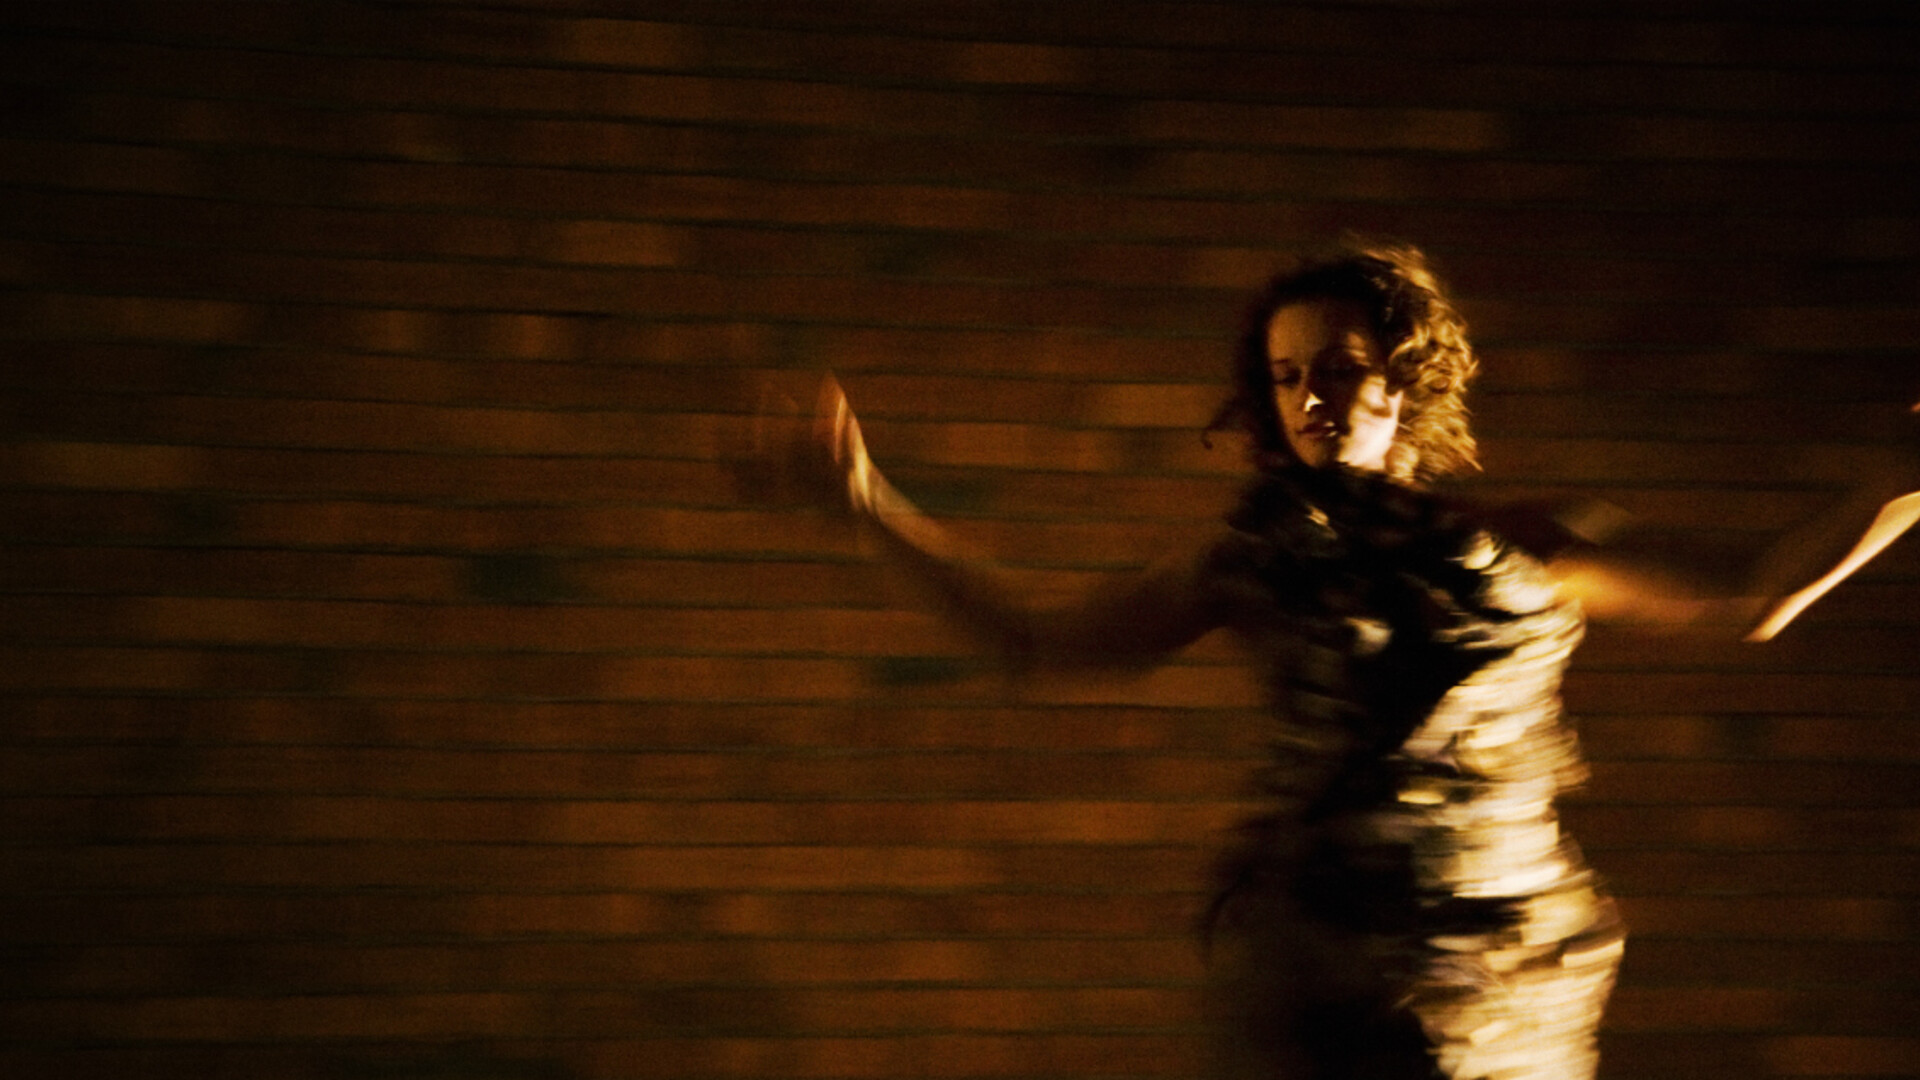 Dancer Carlee Mellow frontlit in a gold dress spinning in front of a brick wall